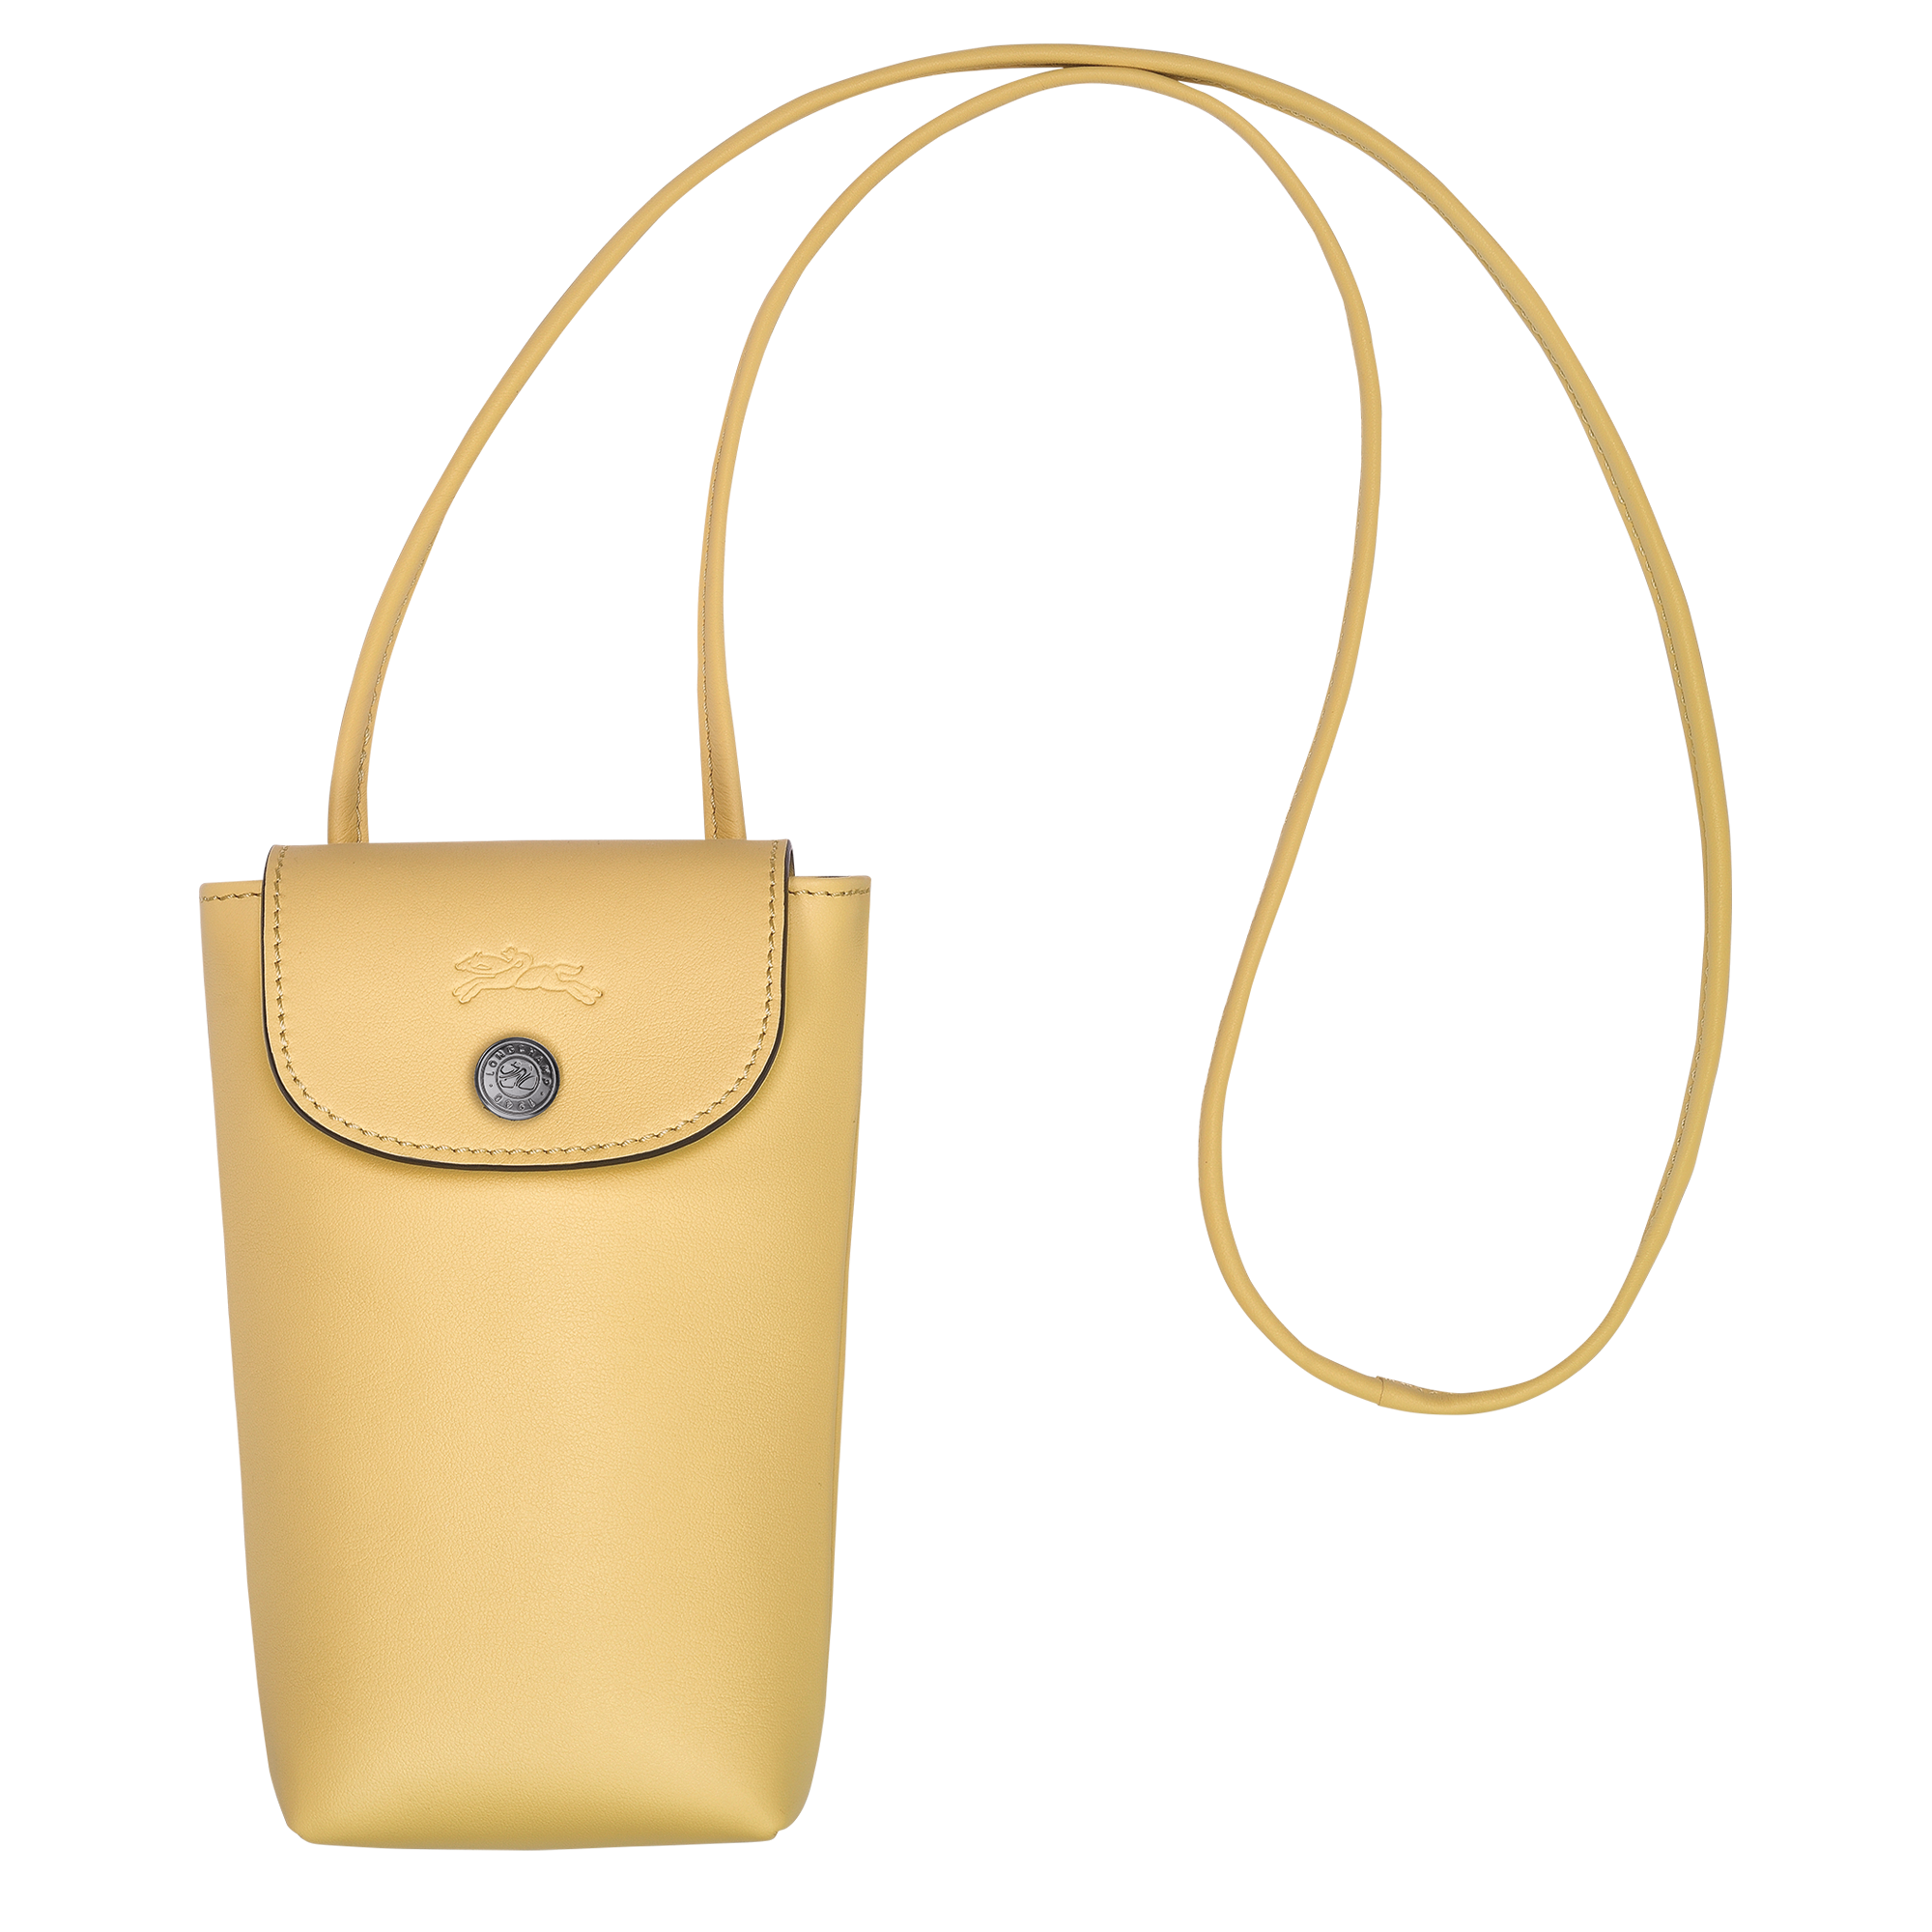 Le Pliage Xtra XS Vanity Wheat - Leather (10187987A81)